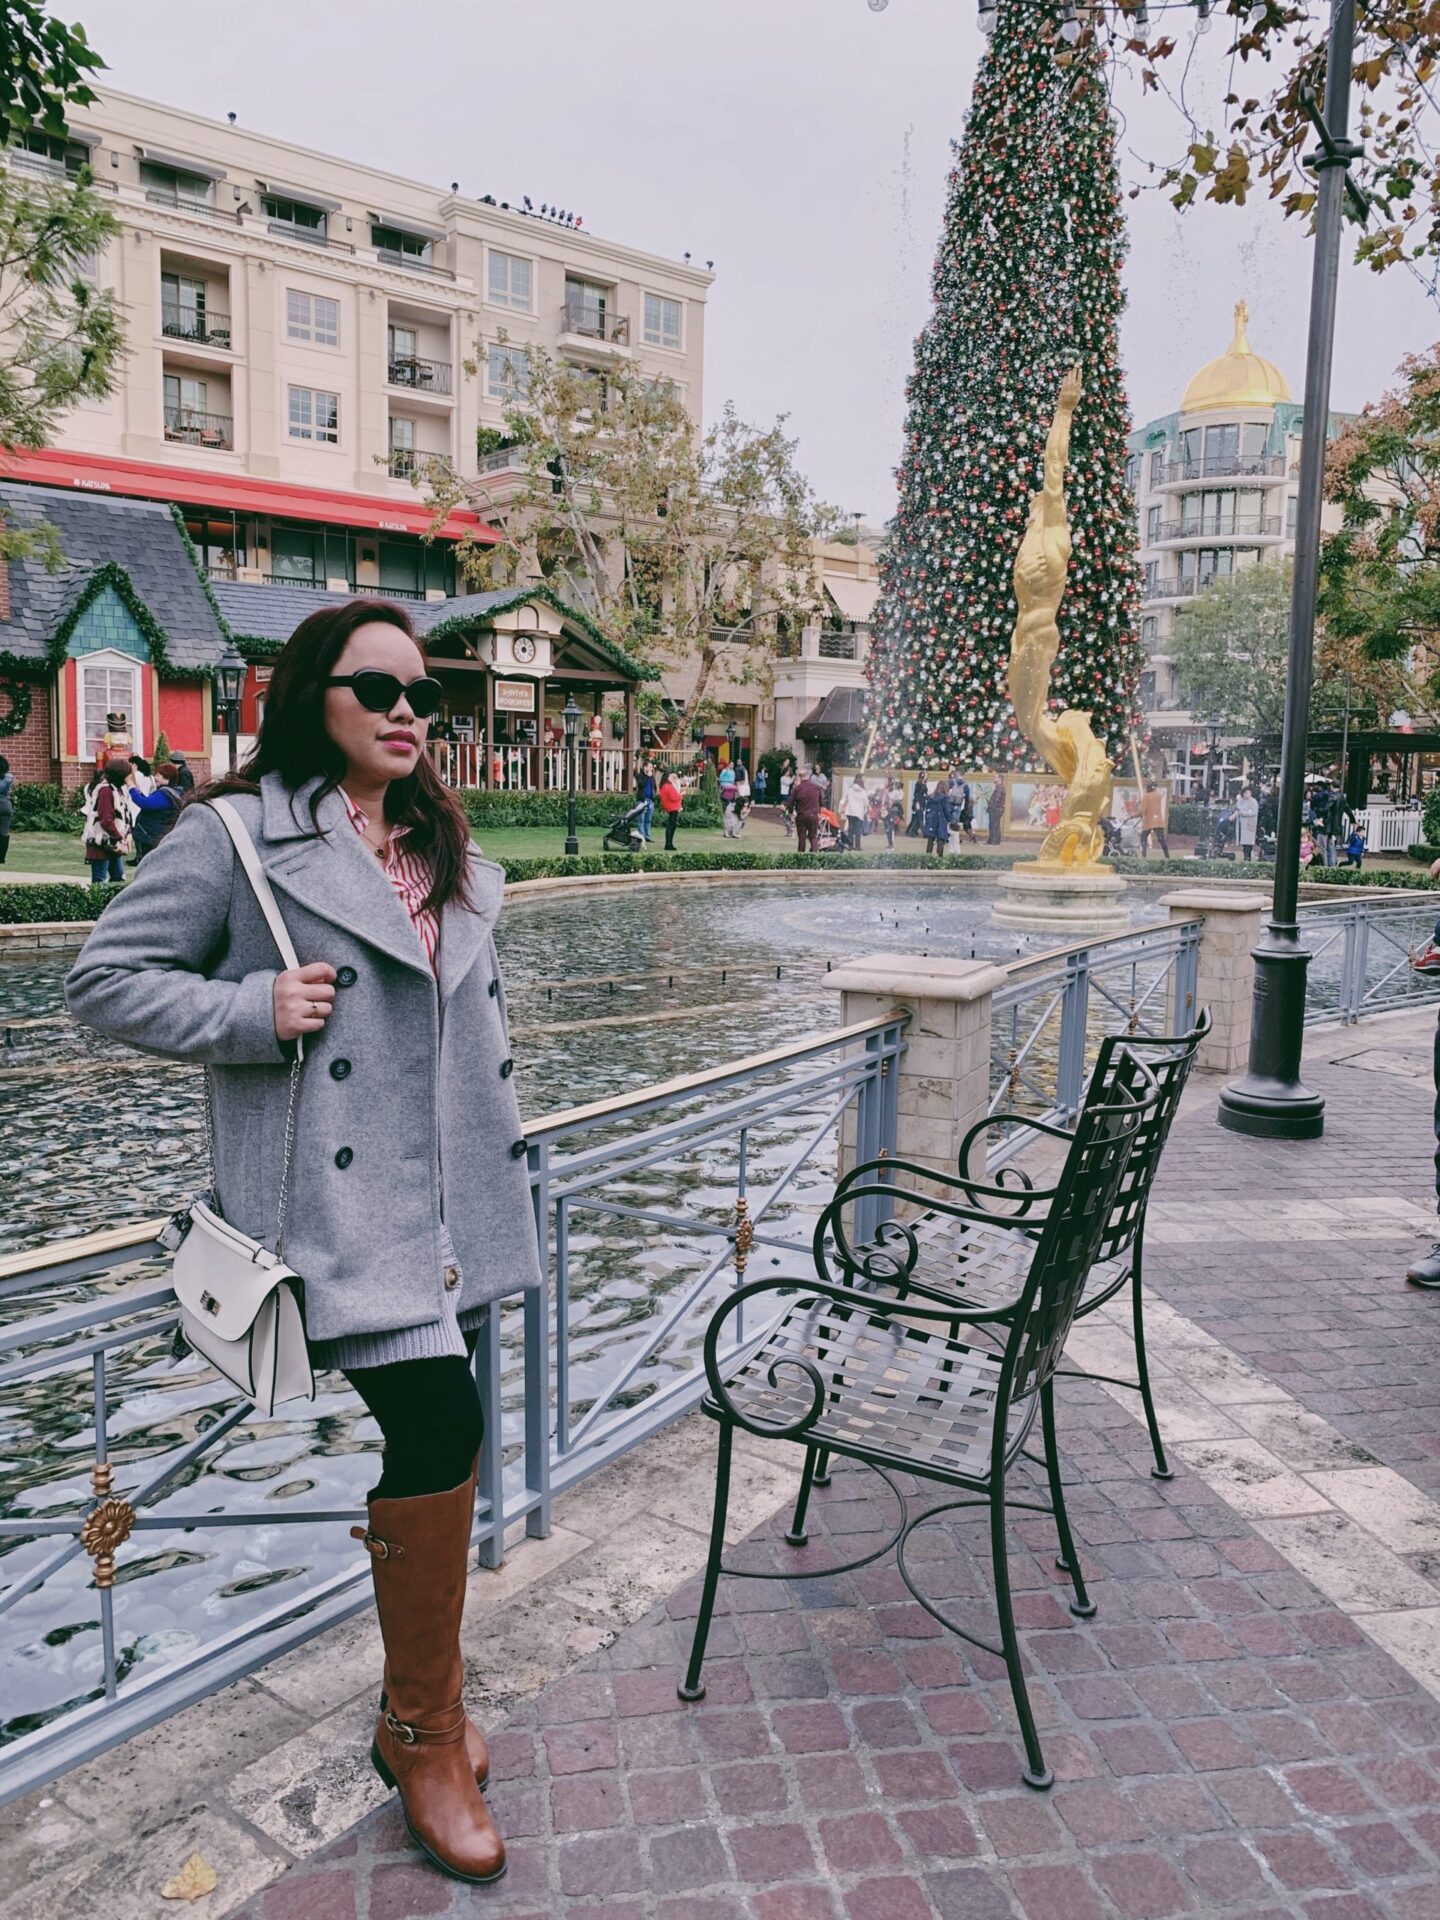 instagram-at-pslilyboutique-pinterest-heart's-desire-gold-sculpture-christmas-tree-lights-benches-streetstyle-travel-blogger-LA-fashion-blogger-scaled.jpg